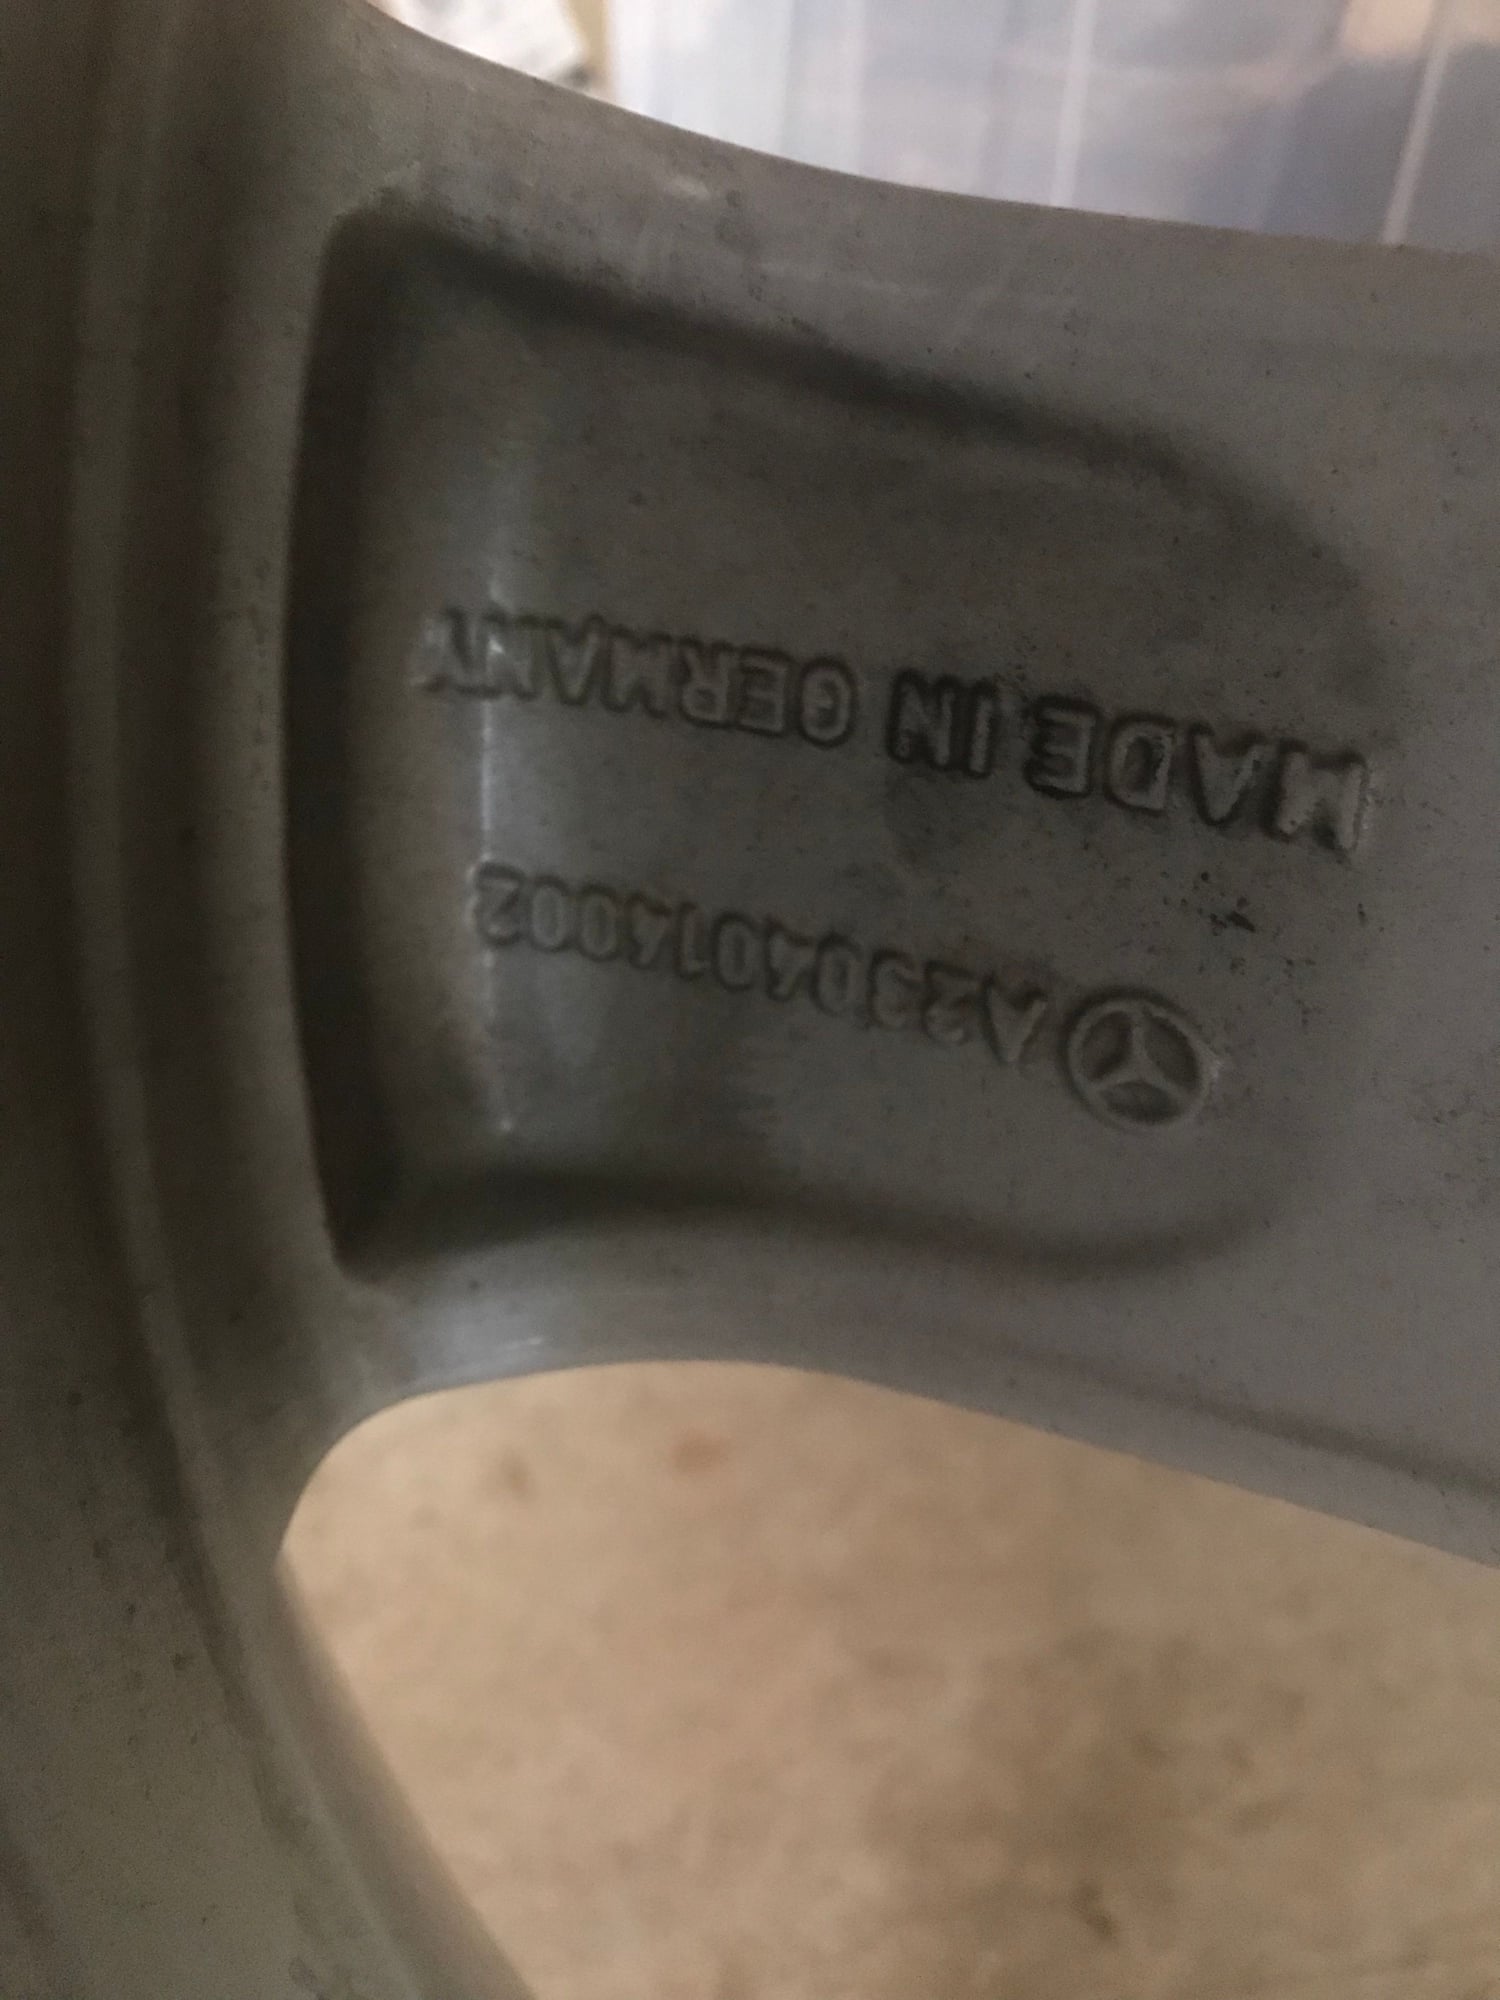 Wheels and Tires/Axles - 2009 SL550 Wheel and tires - Used - 2009 to 2012 Mercedes-Benz SL550 - Hudson, NH 03051, United States